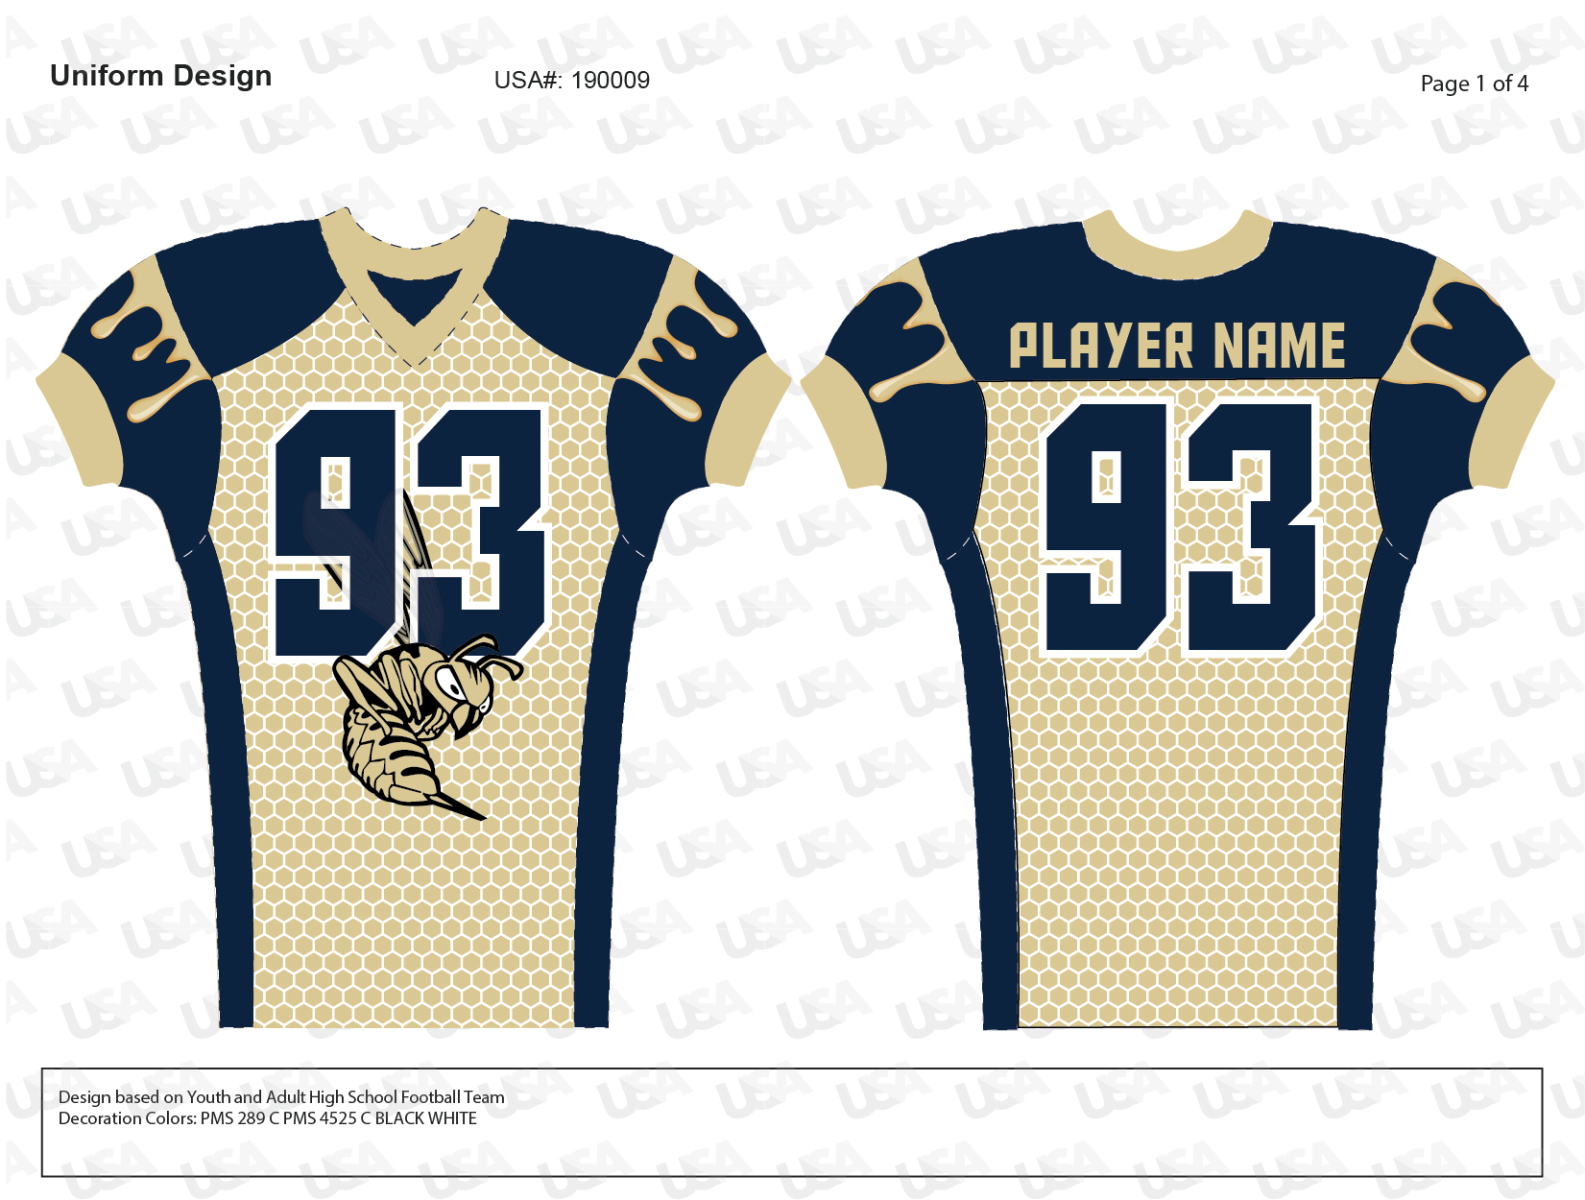 Download HORNETS FOOTBALL COMPRESSION JERSEY DESIGN MOCKUP by Unique Sports Apparel on Dribbble